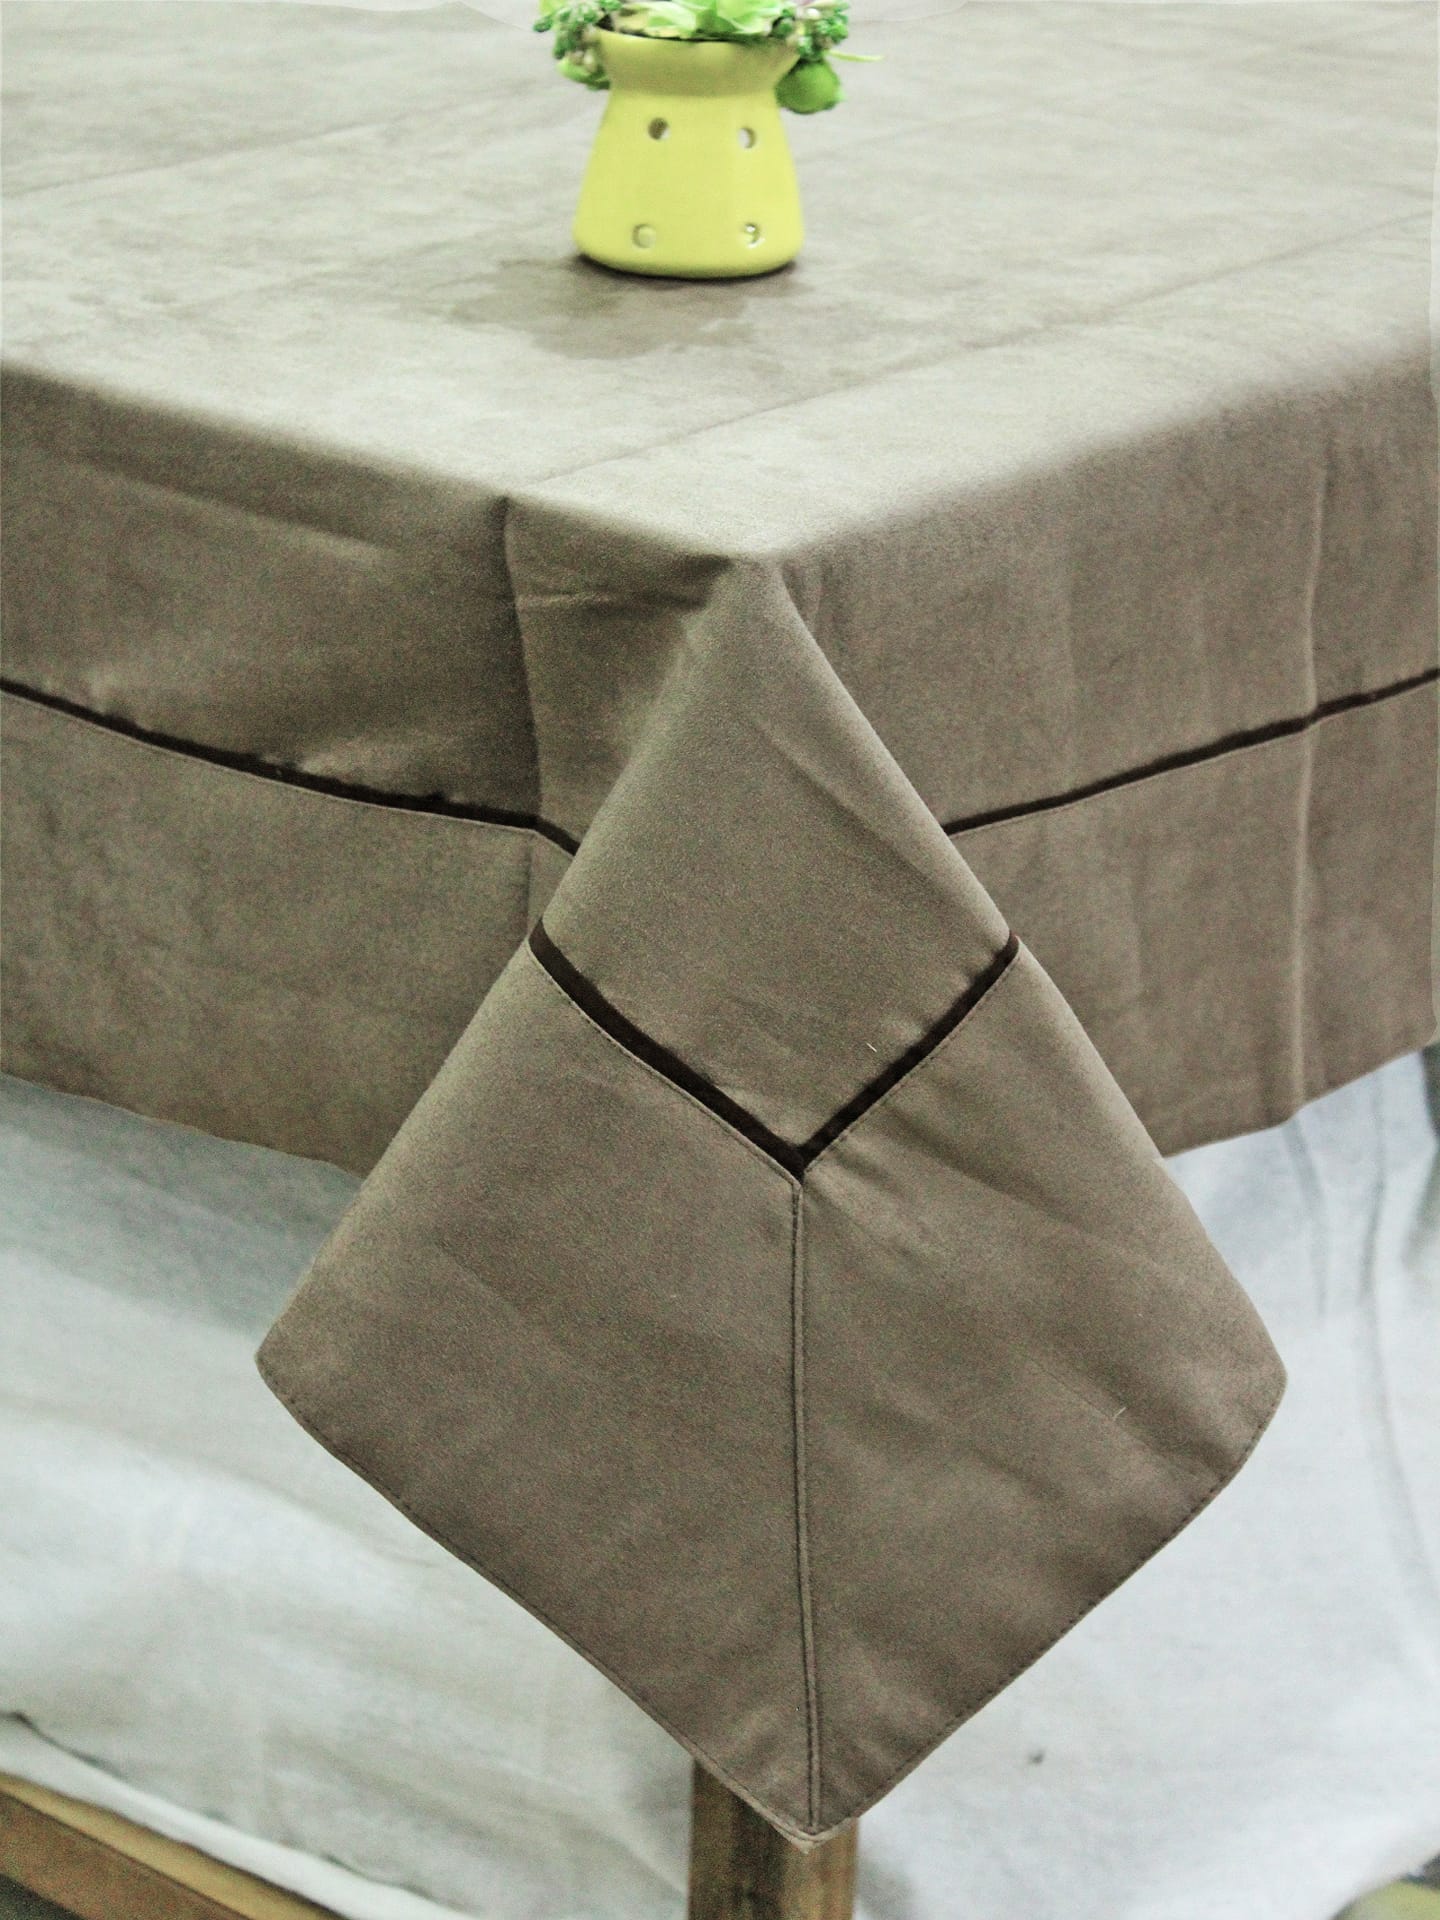 Suede Khaki Plain Microfibre Table Cloth(1 Pc) online in India at best prices